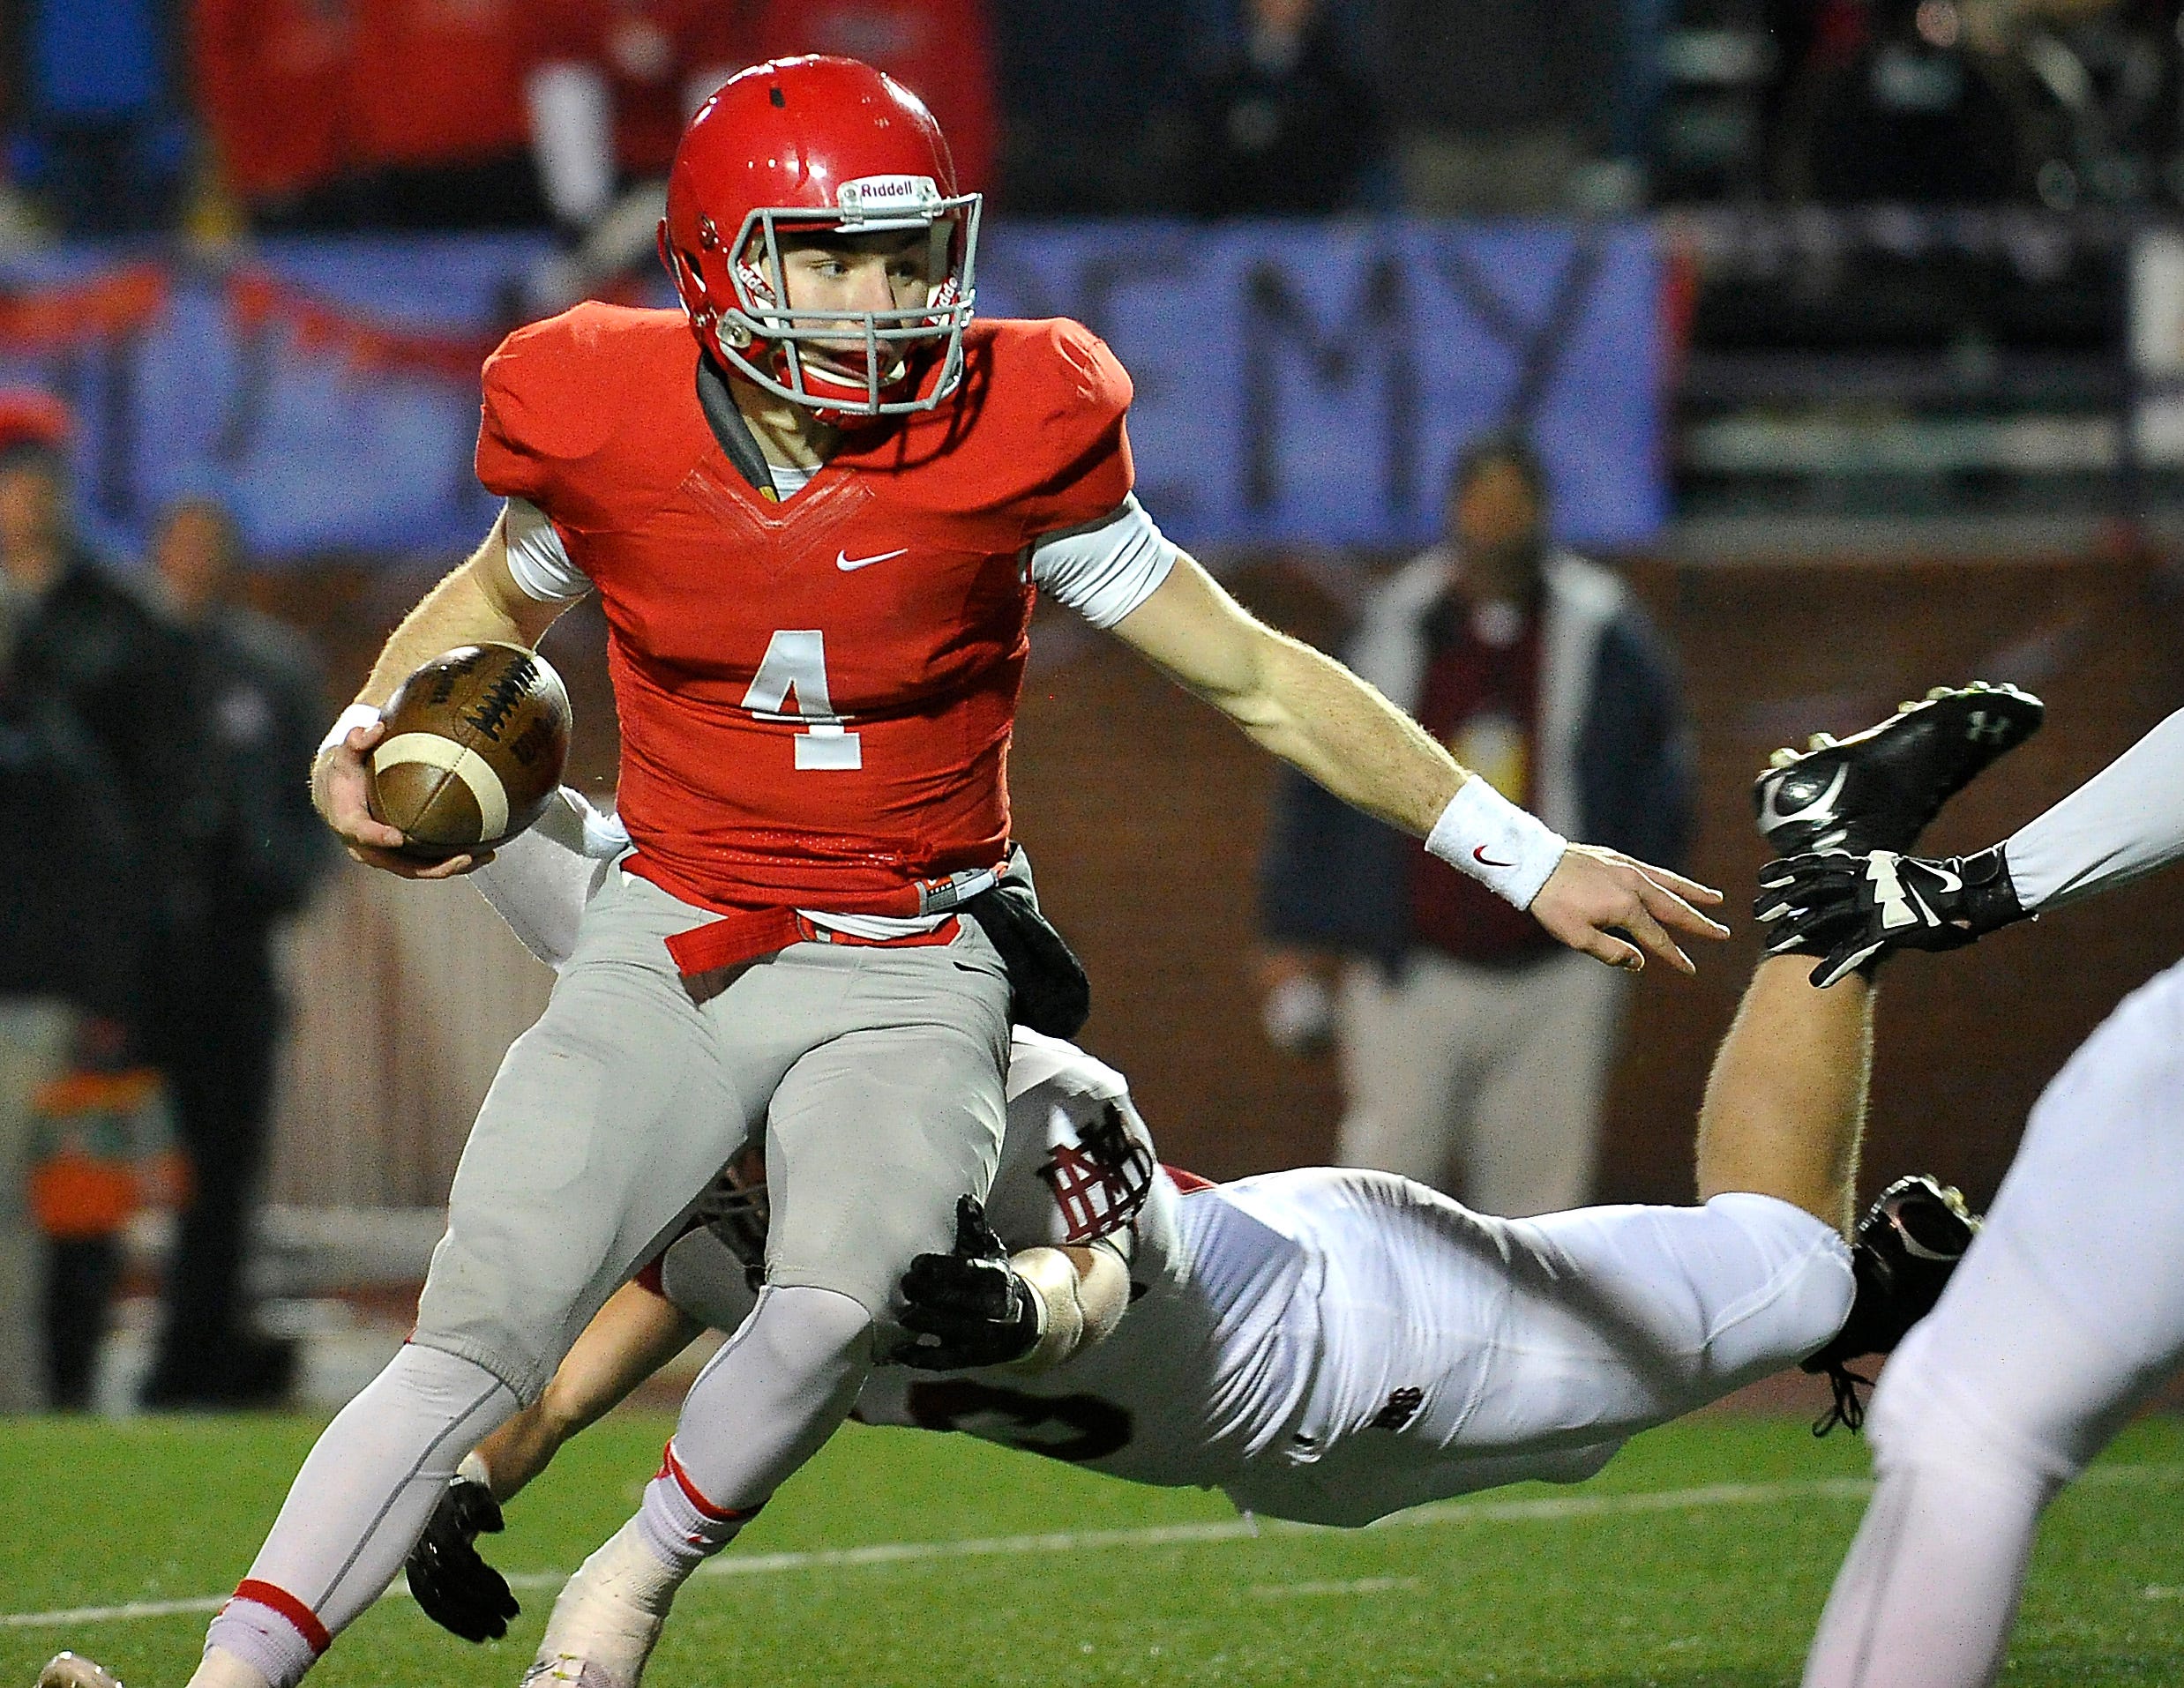 Brentwood Academy's Jeremiah Oatsvall scrambles in the DII-AA state title game. Oatsvall was named offensive MVP, completing 17 of 29 pass attempts for 280 yards and gaining 159 yards rushing and two scores on 23 carries.